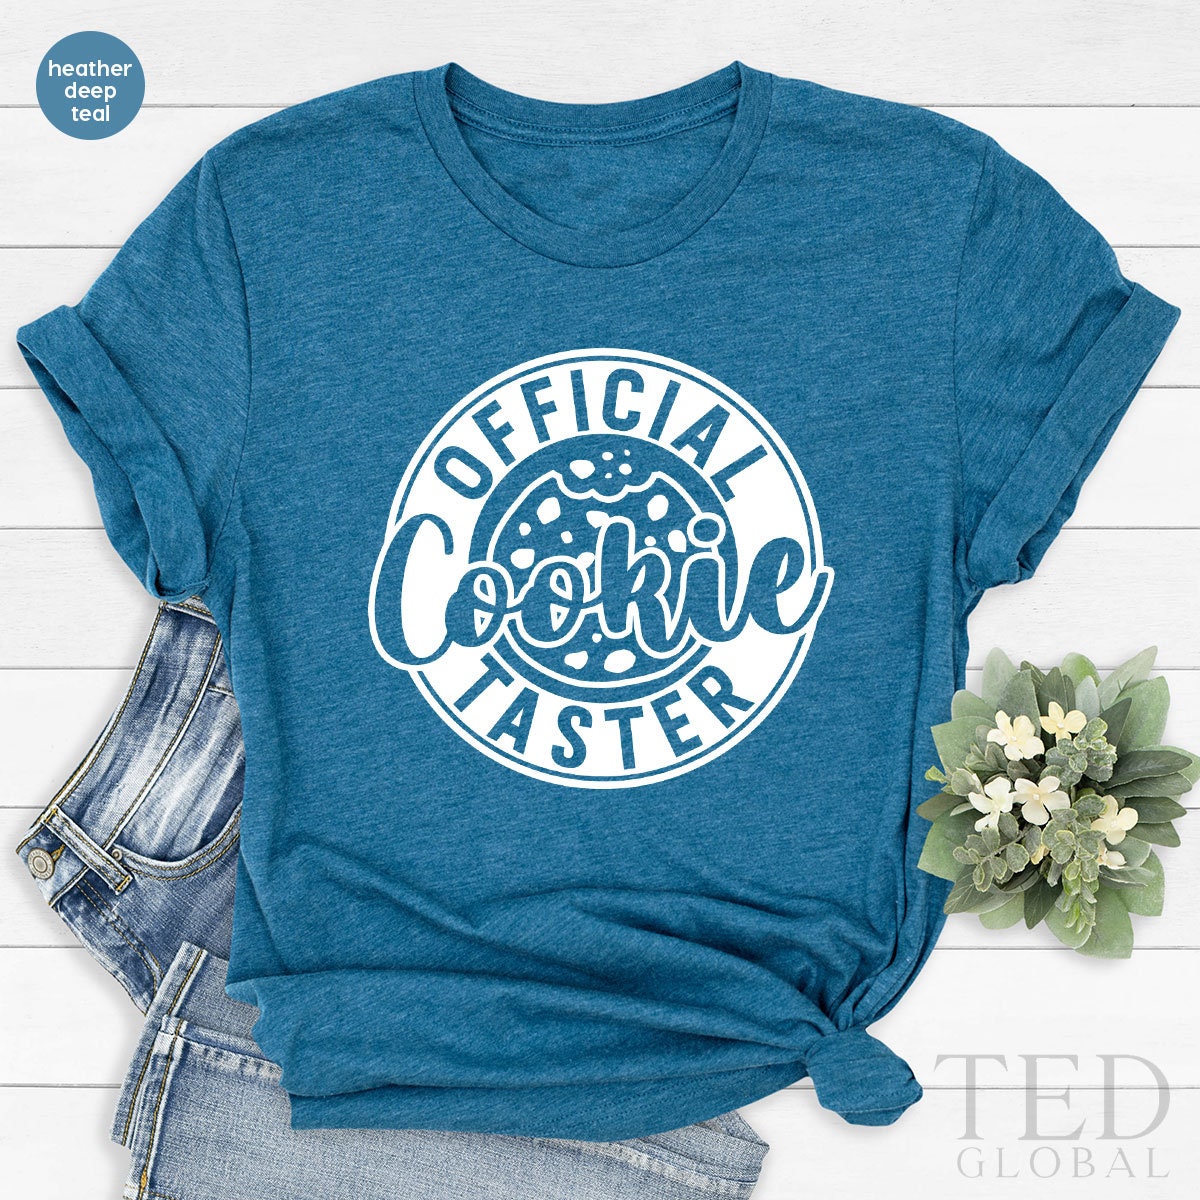 Cute Official Cookie Taster T-Shirt, Family Christmas Shirt, Funny Baking Shirts, Christmas Baking Shirt, Cookie TShirt, Gift For Christmas - Fastdeliverytees.com